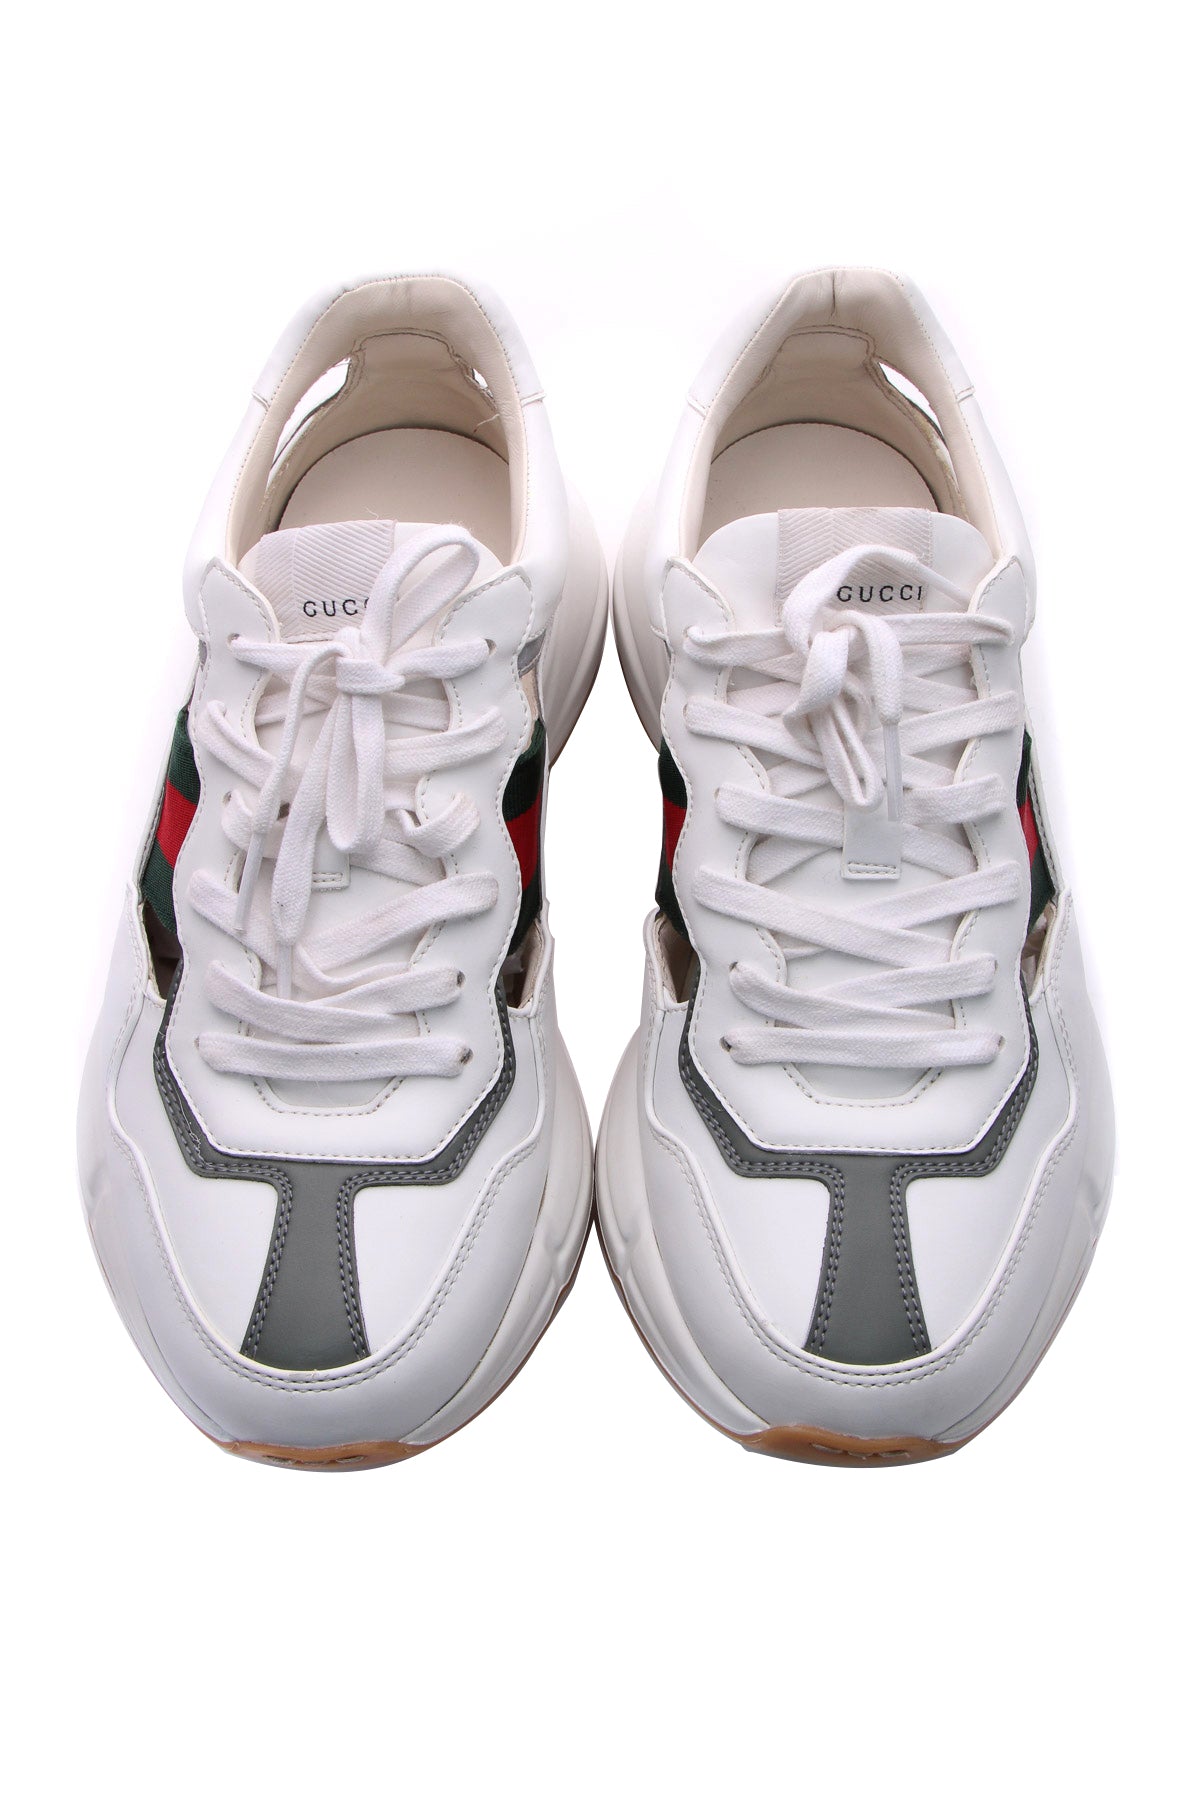 Louis Vuitton, Shoes, Louis Vuitton Mens Pink Sneakers Lv Size 85 I  Normally Wear Us Size 5